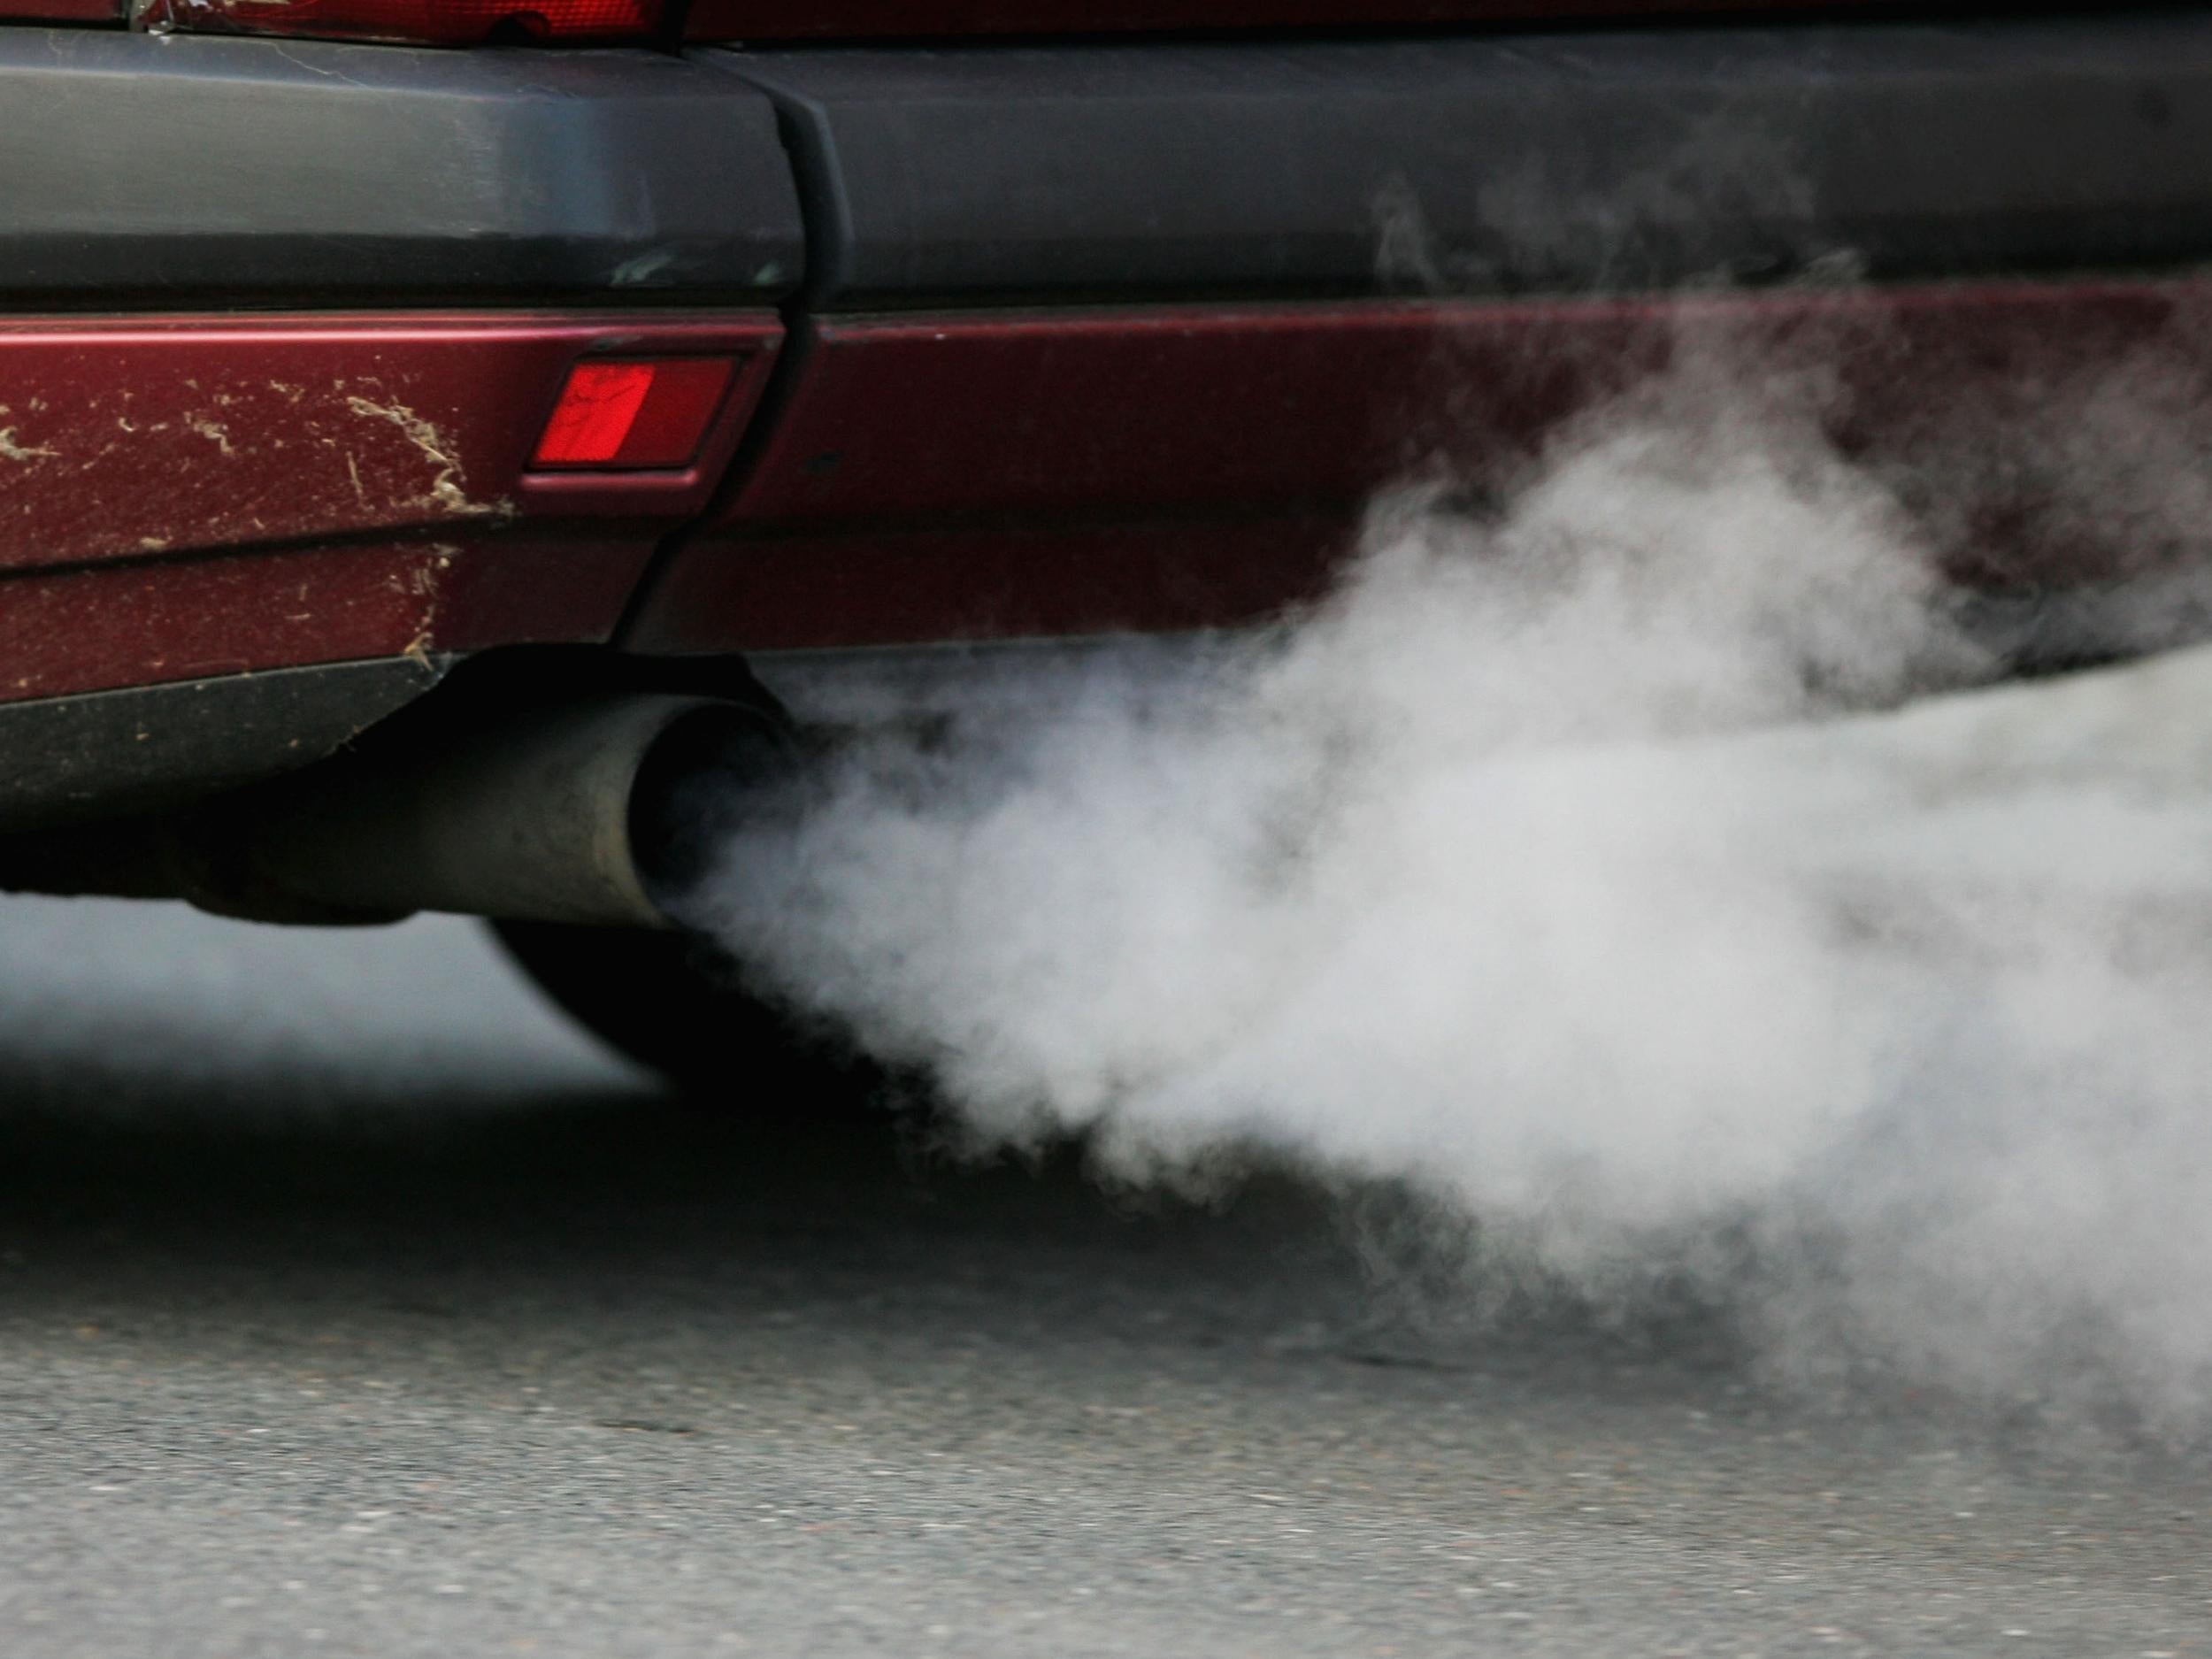 Vehicle exhausts are a major source of the pollution that prematurely ends the lives of 40,000 people a year in Britain